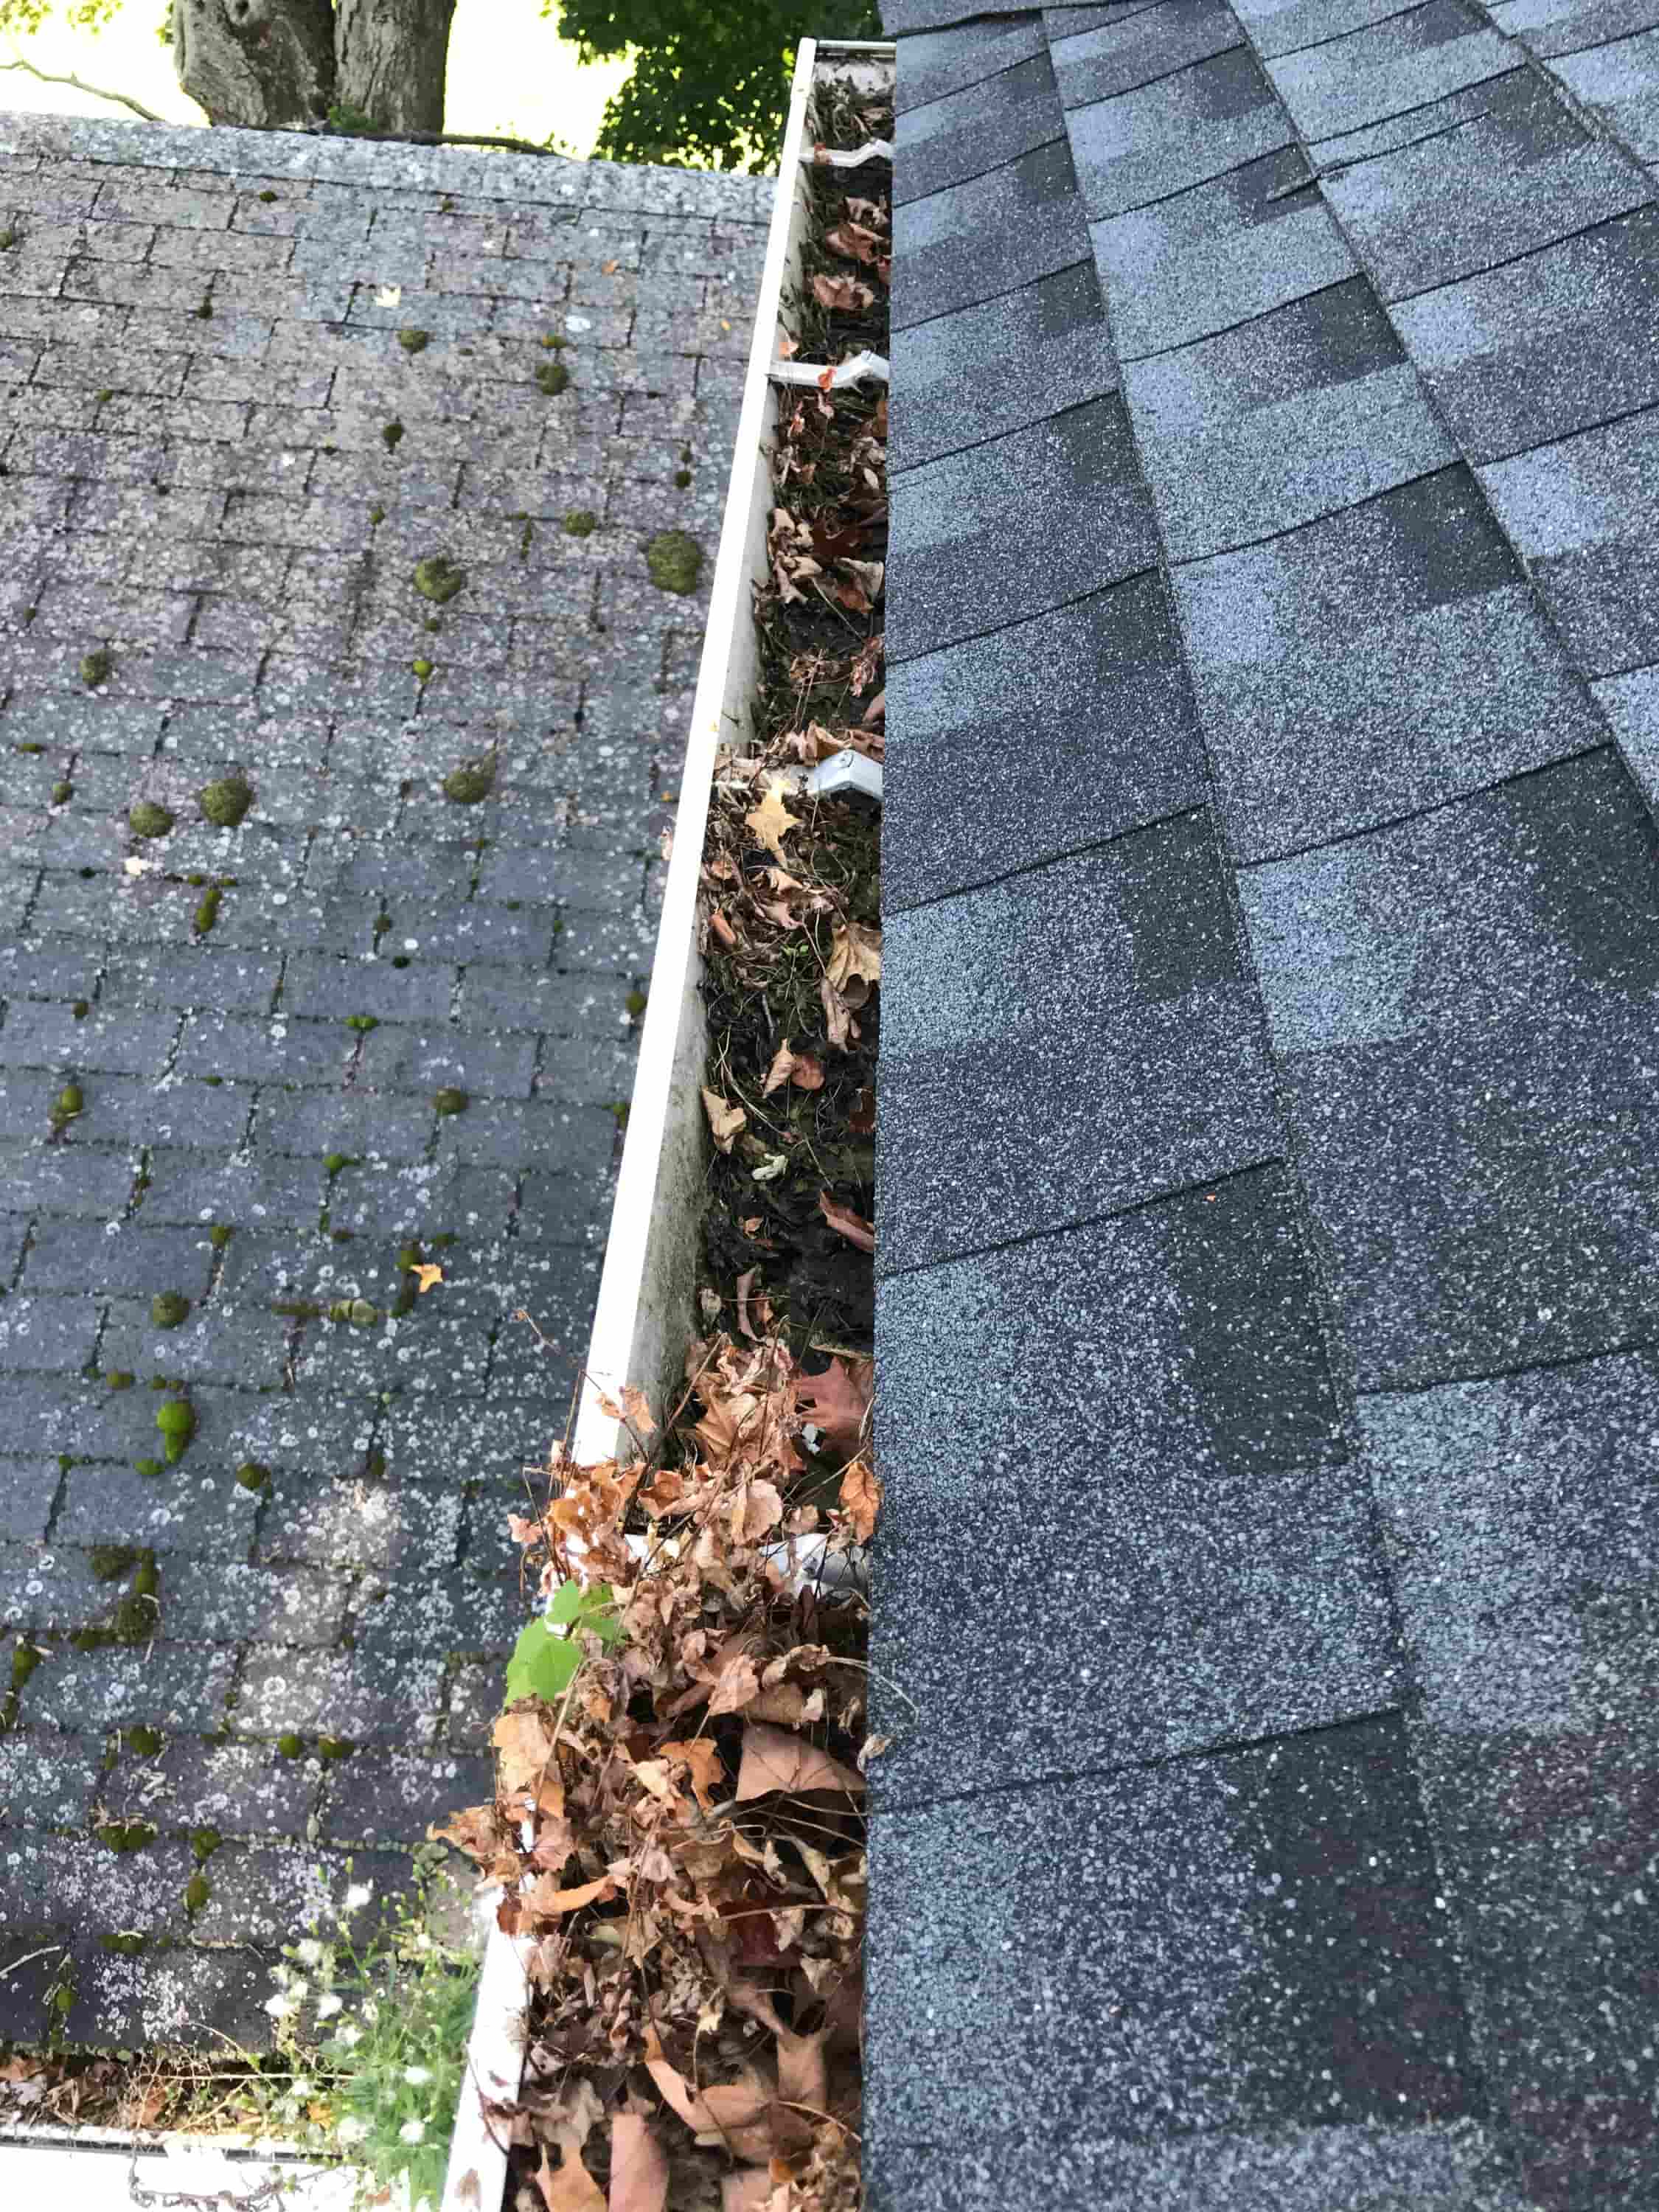 how to replace a section of gutter